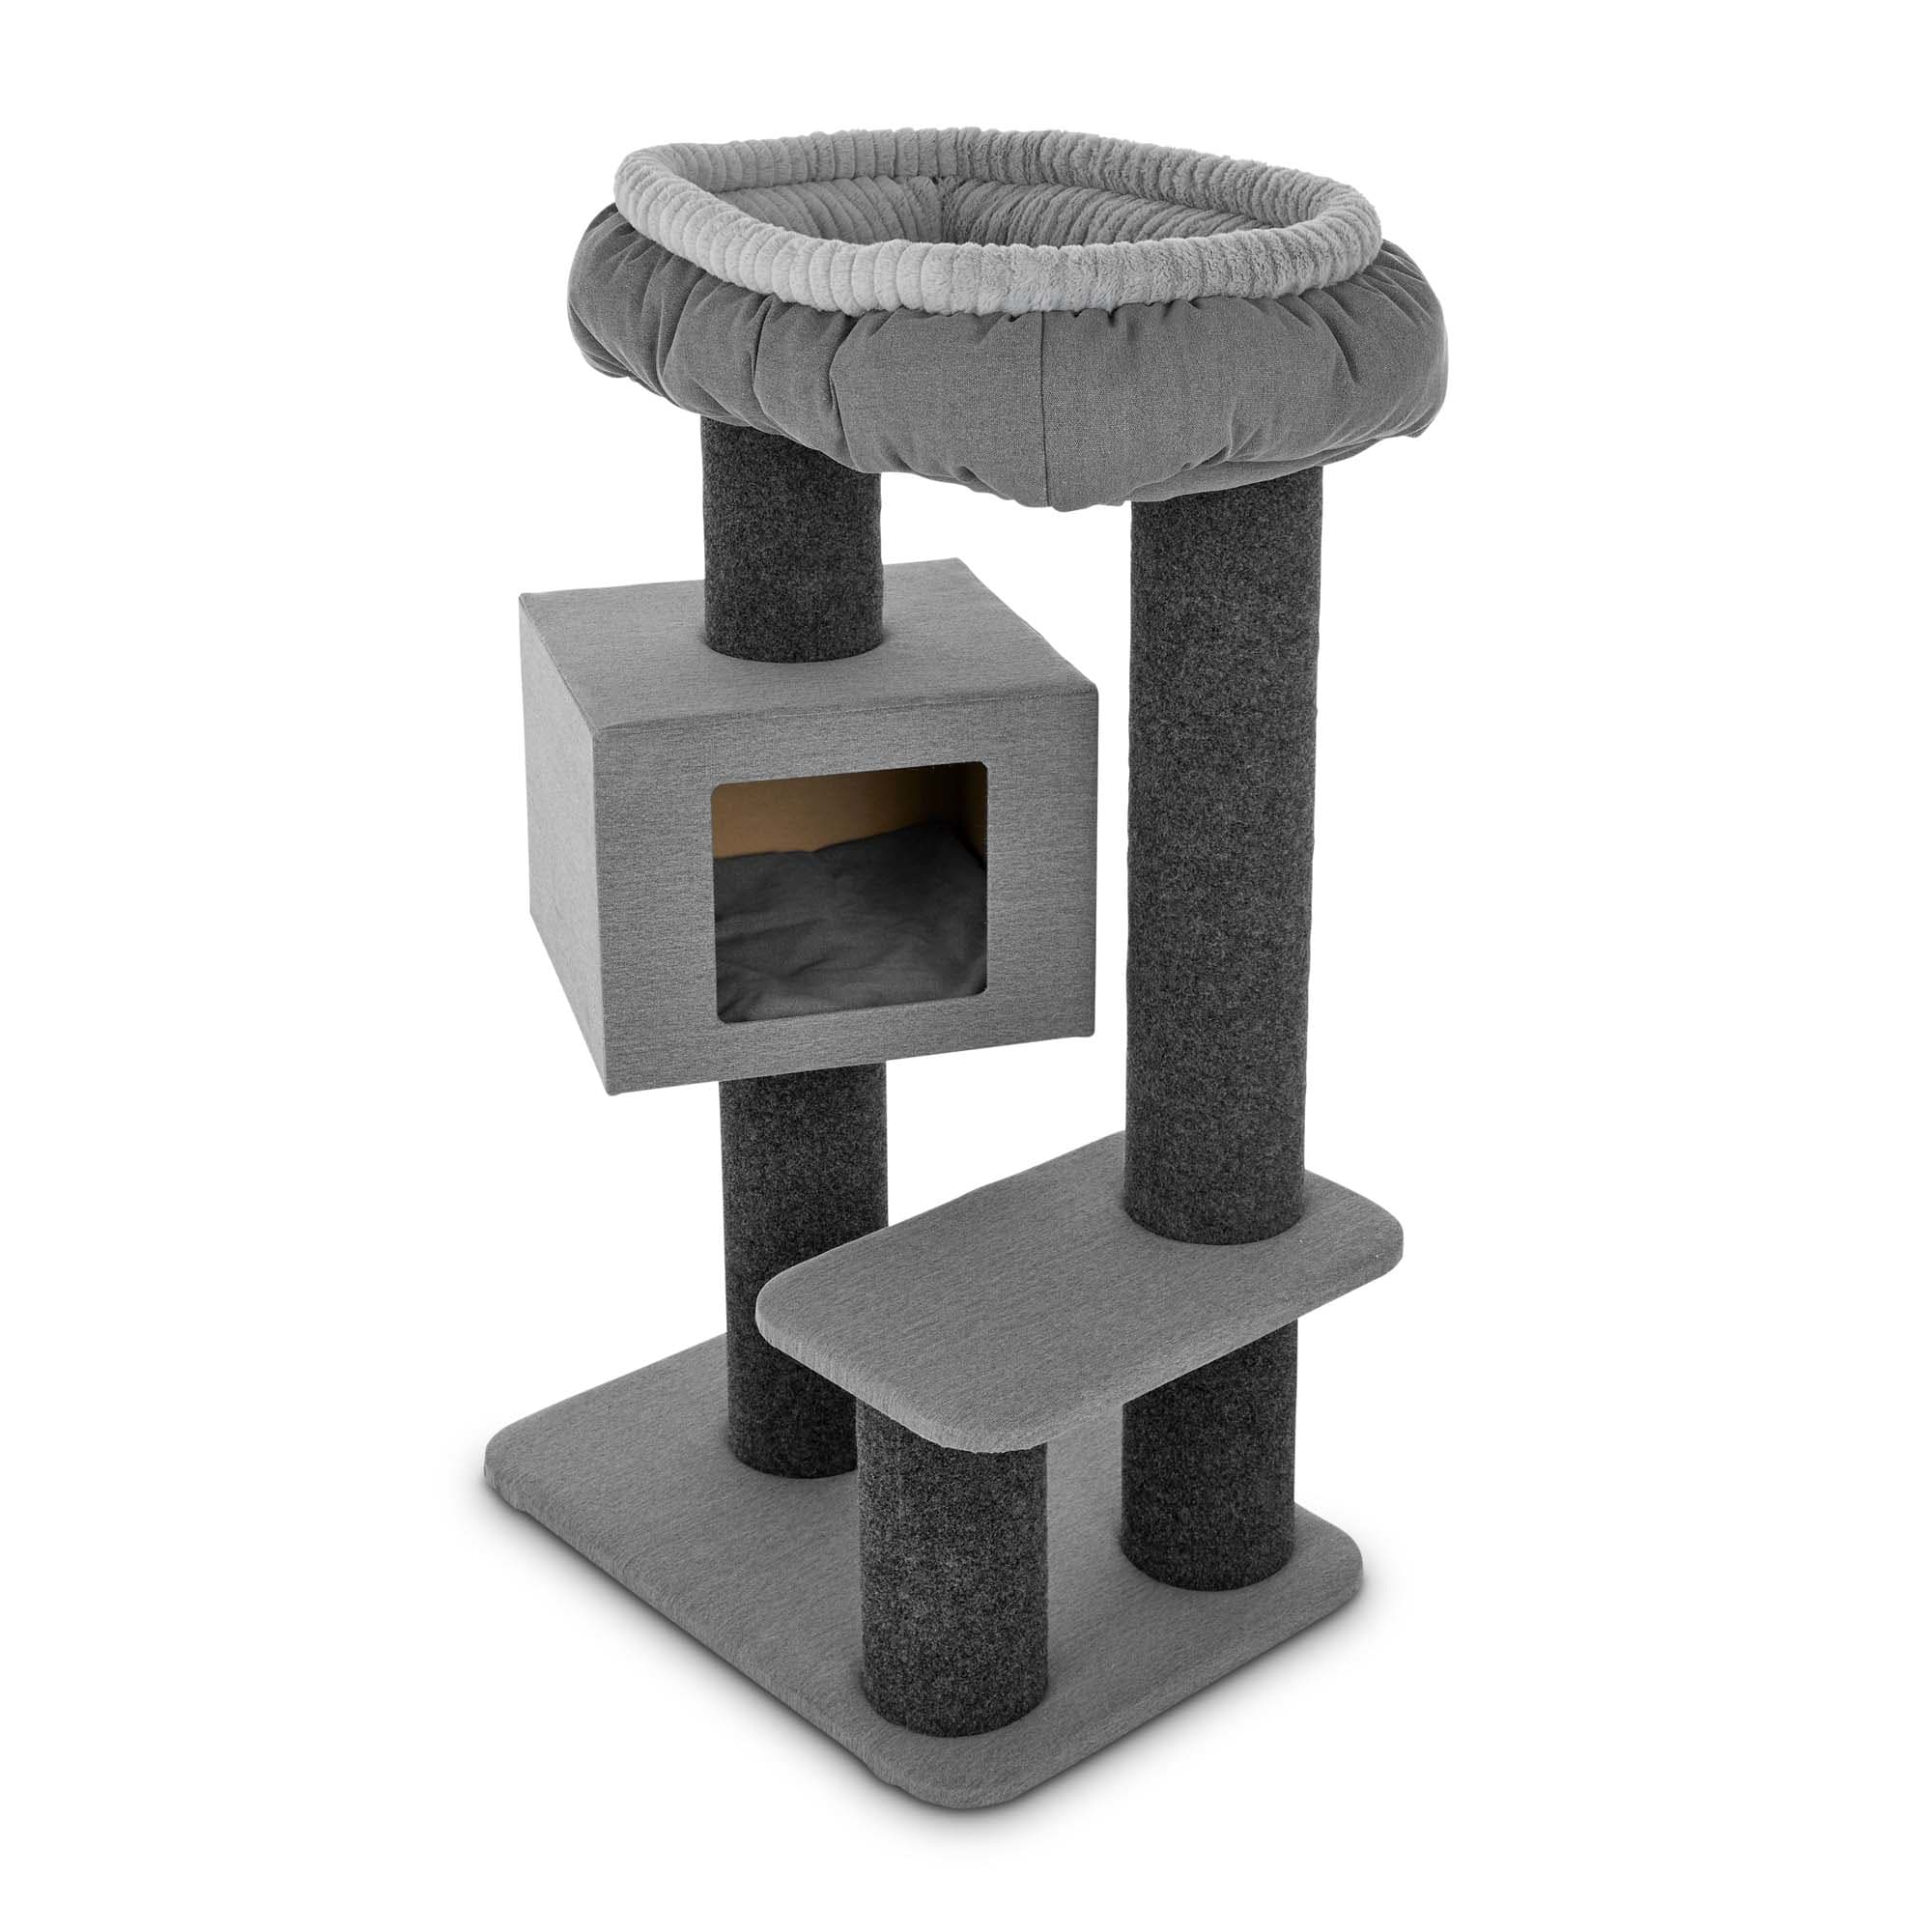 You \u0026 Me Afternoon Abode Cat Tree, 45 